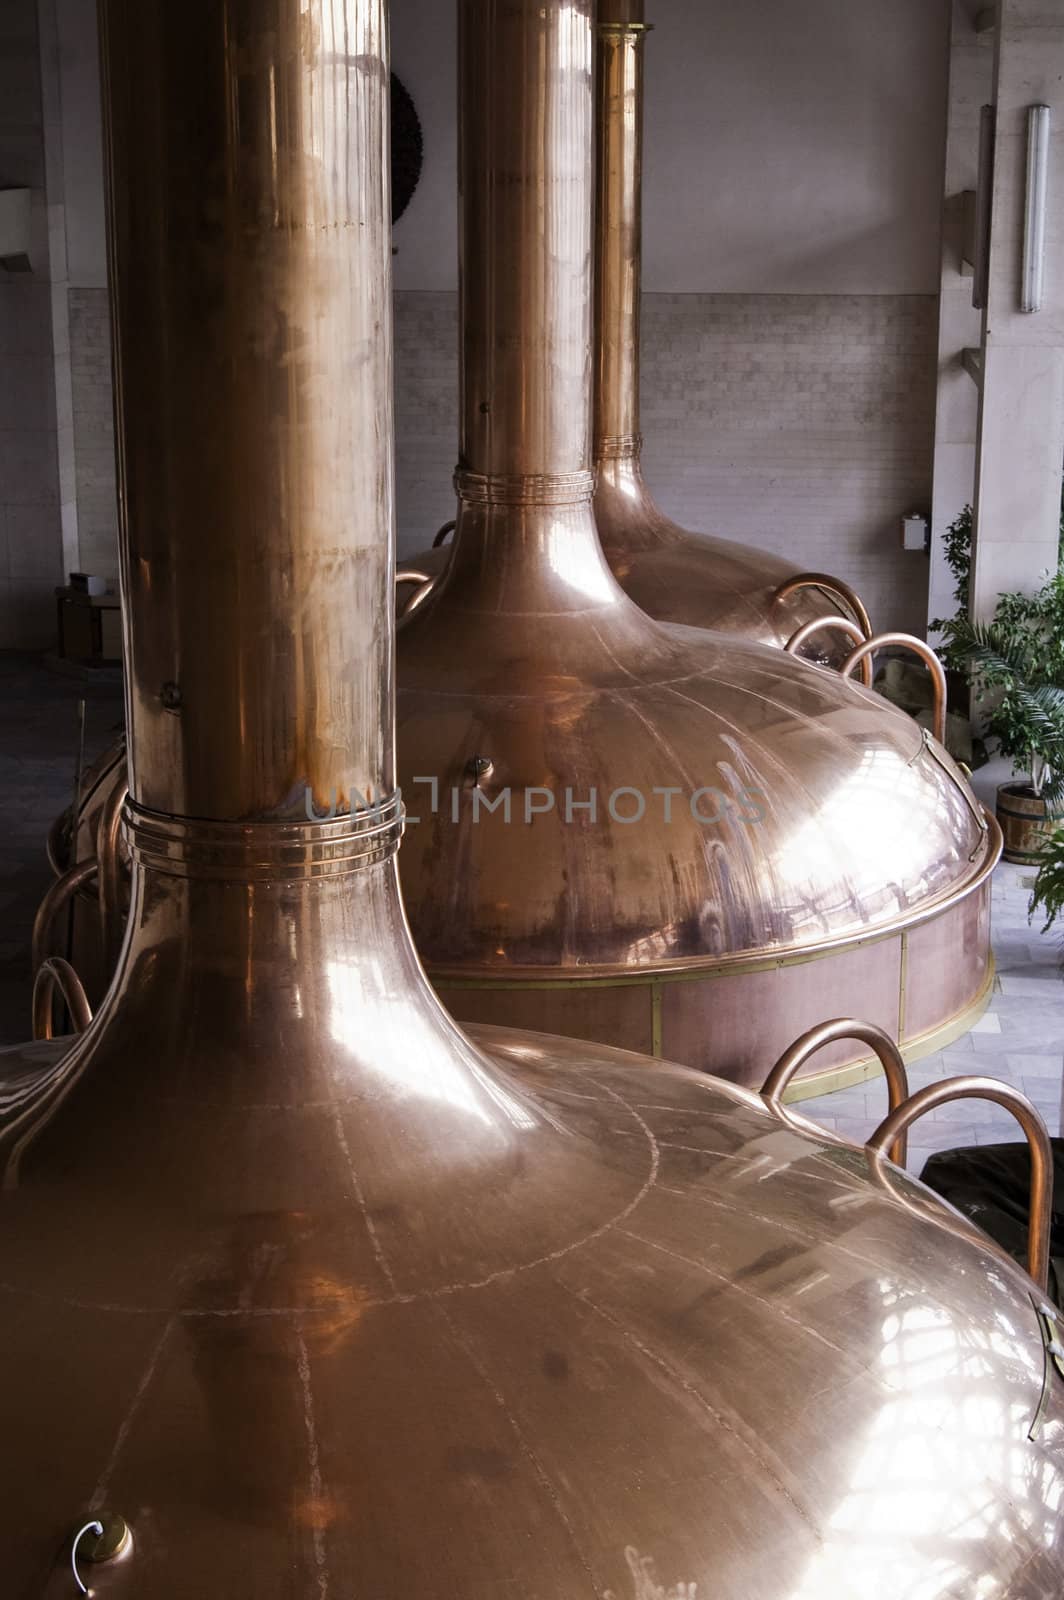 Copper holding tanks used to ferment beer during the brewing process